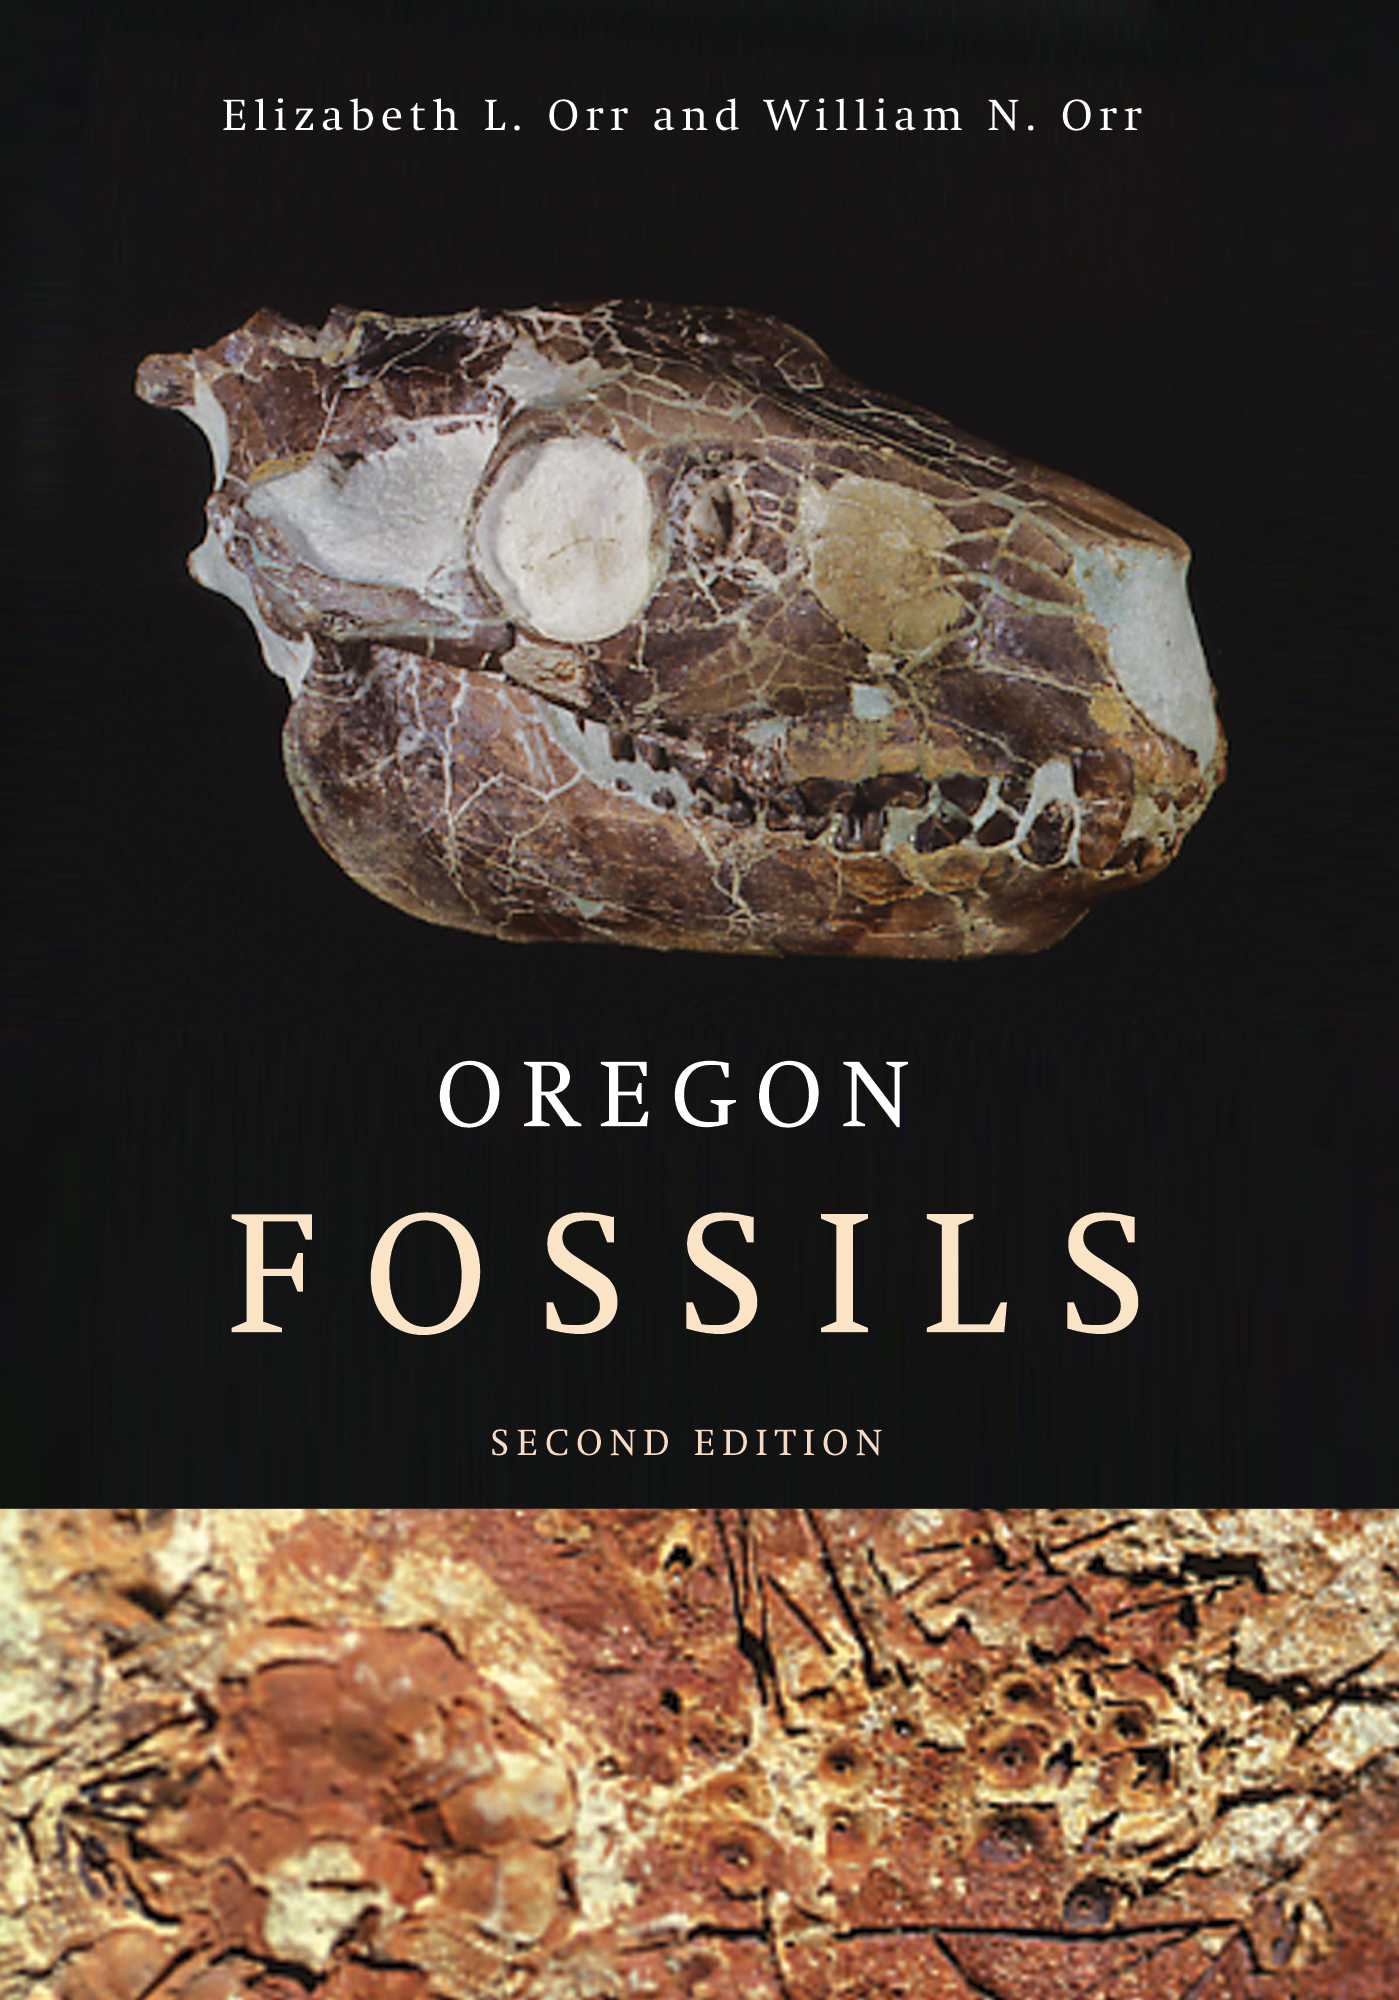 Photo shows the NEW Second Edition of Oregon Fossils, by Elizabeth L. Orr and William N. Orr ISBN 978-0-87071-573-0 a new revised and expanded guide for Oregon fossils - Hot off the Press!  To ensure availibility of this item, order as early as possible. Click here to learn more about the largest selection of Regional Books and Maps for Oregon from FACETS book shelf!